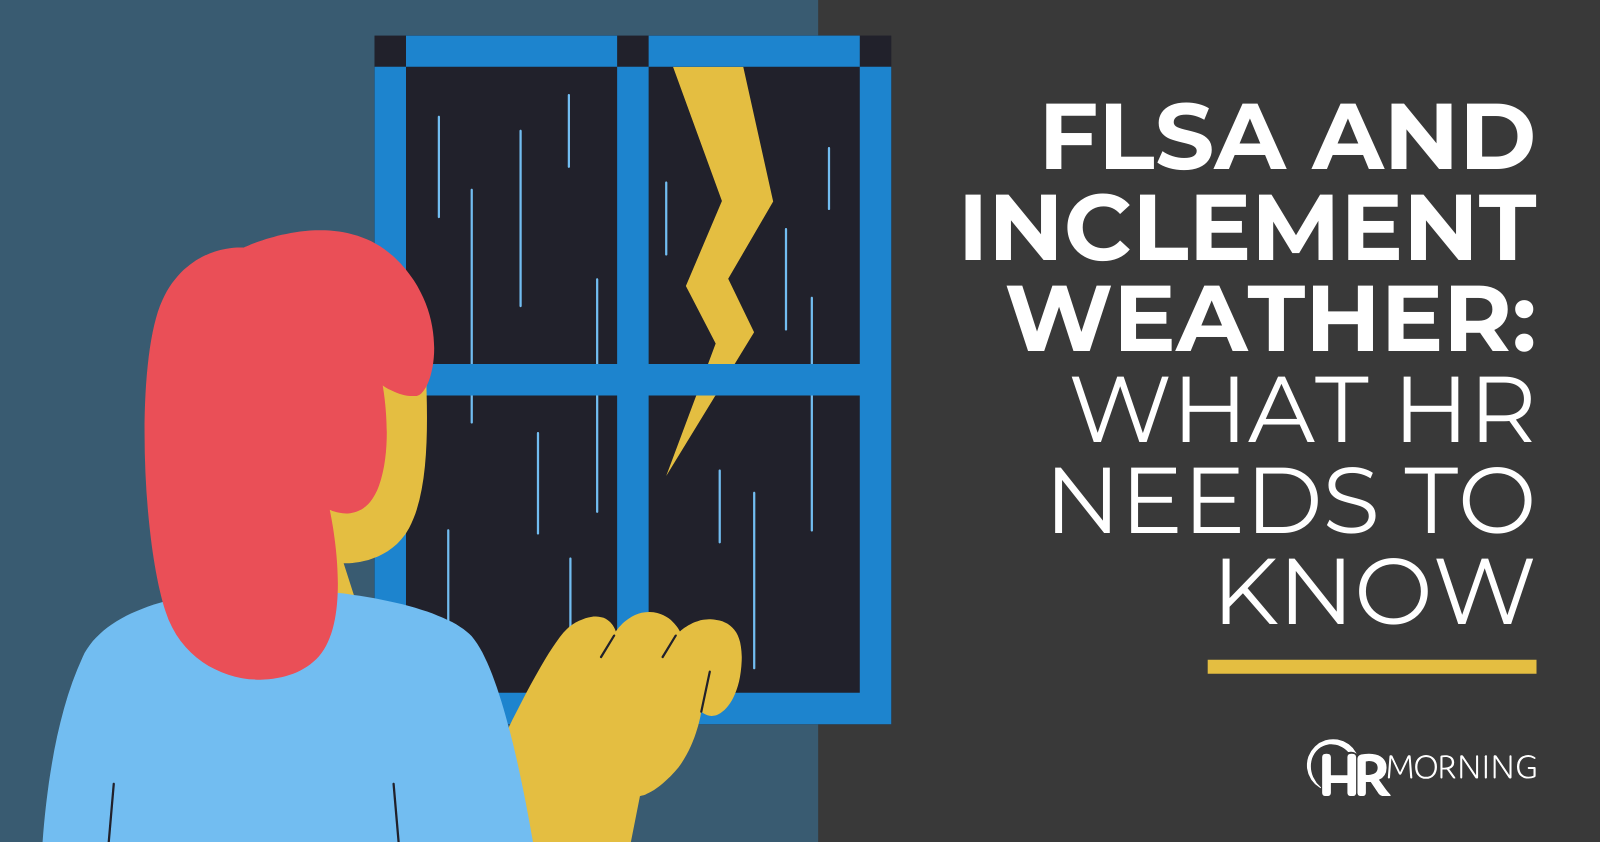 FLSA and inclement weather: What HR needs to know